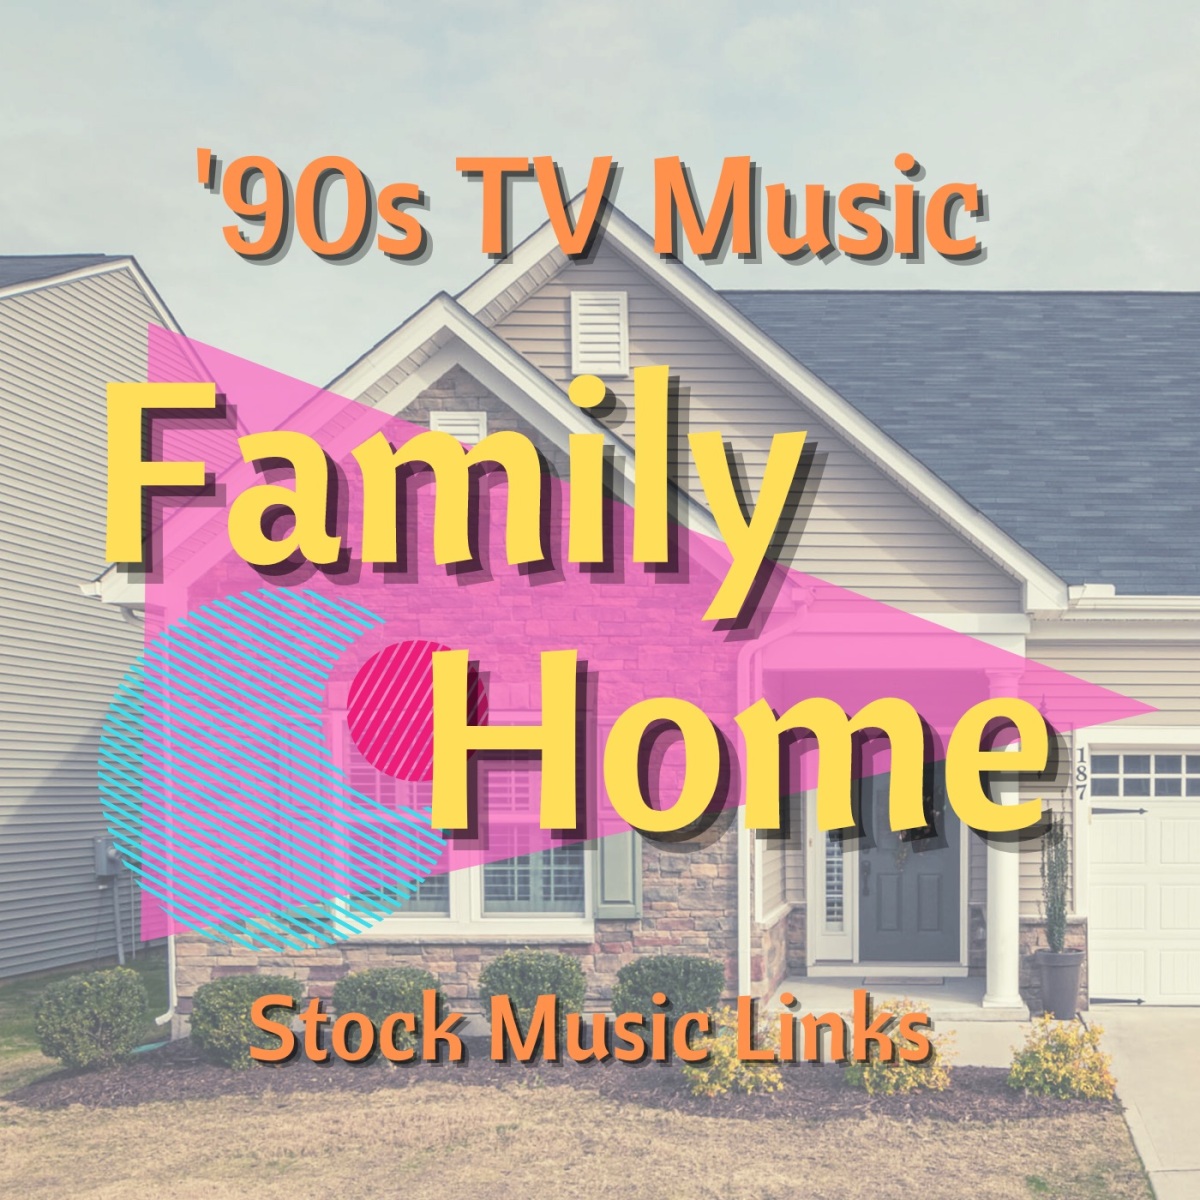 Royalty Free 90s TV Music: Two FREE Generic ’80s / ’90s TV Show Theme Music!